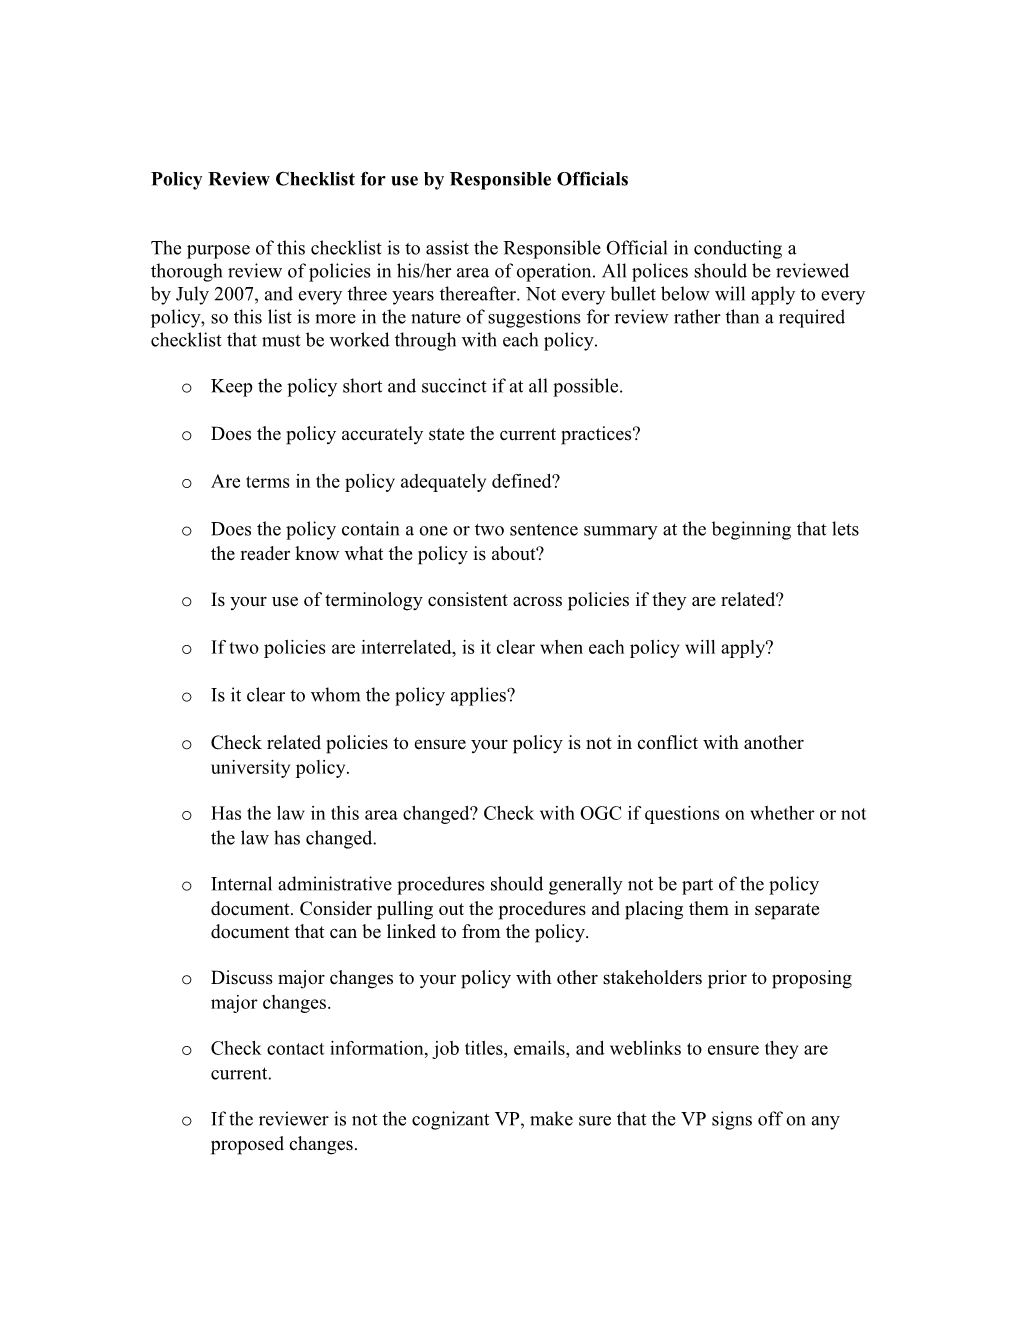 Policy Review Checklist for Use by Responsible Officials